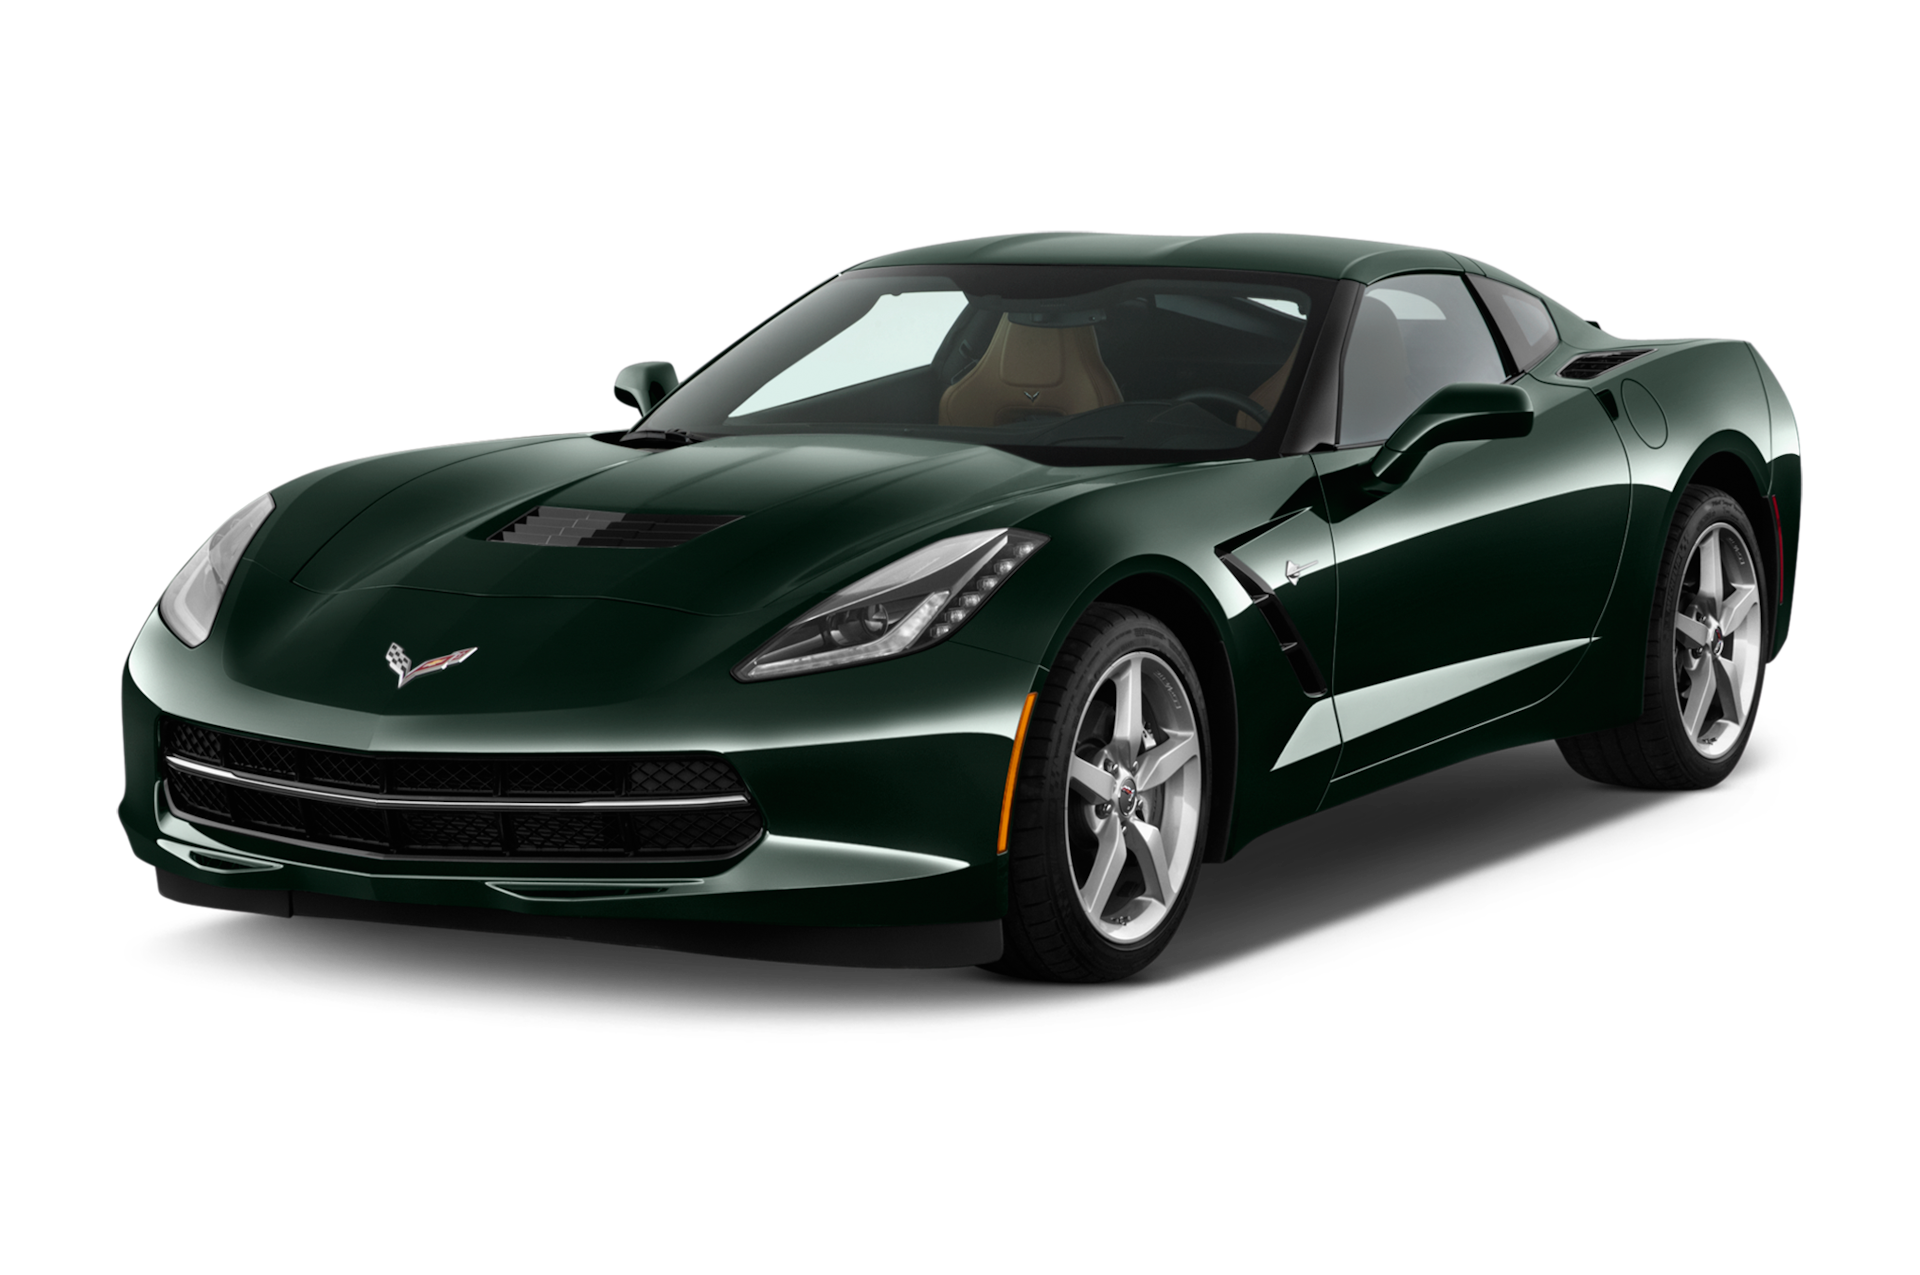 2014 Chevrolet Corvette Prices, Reviews, and Photos - MotorTrend